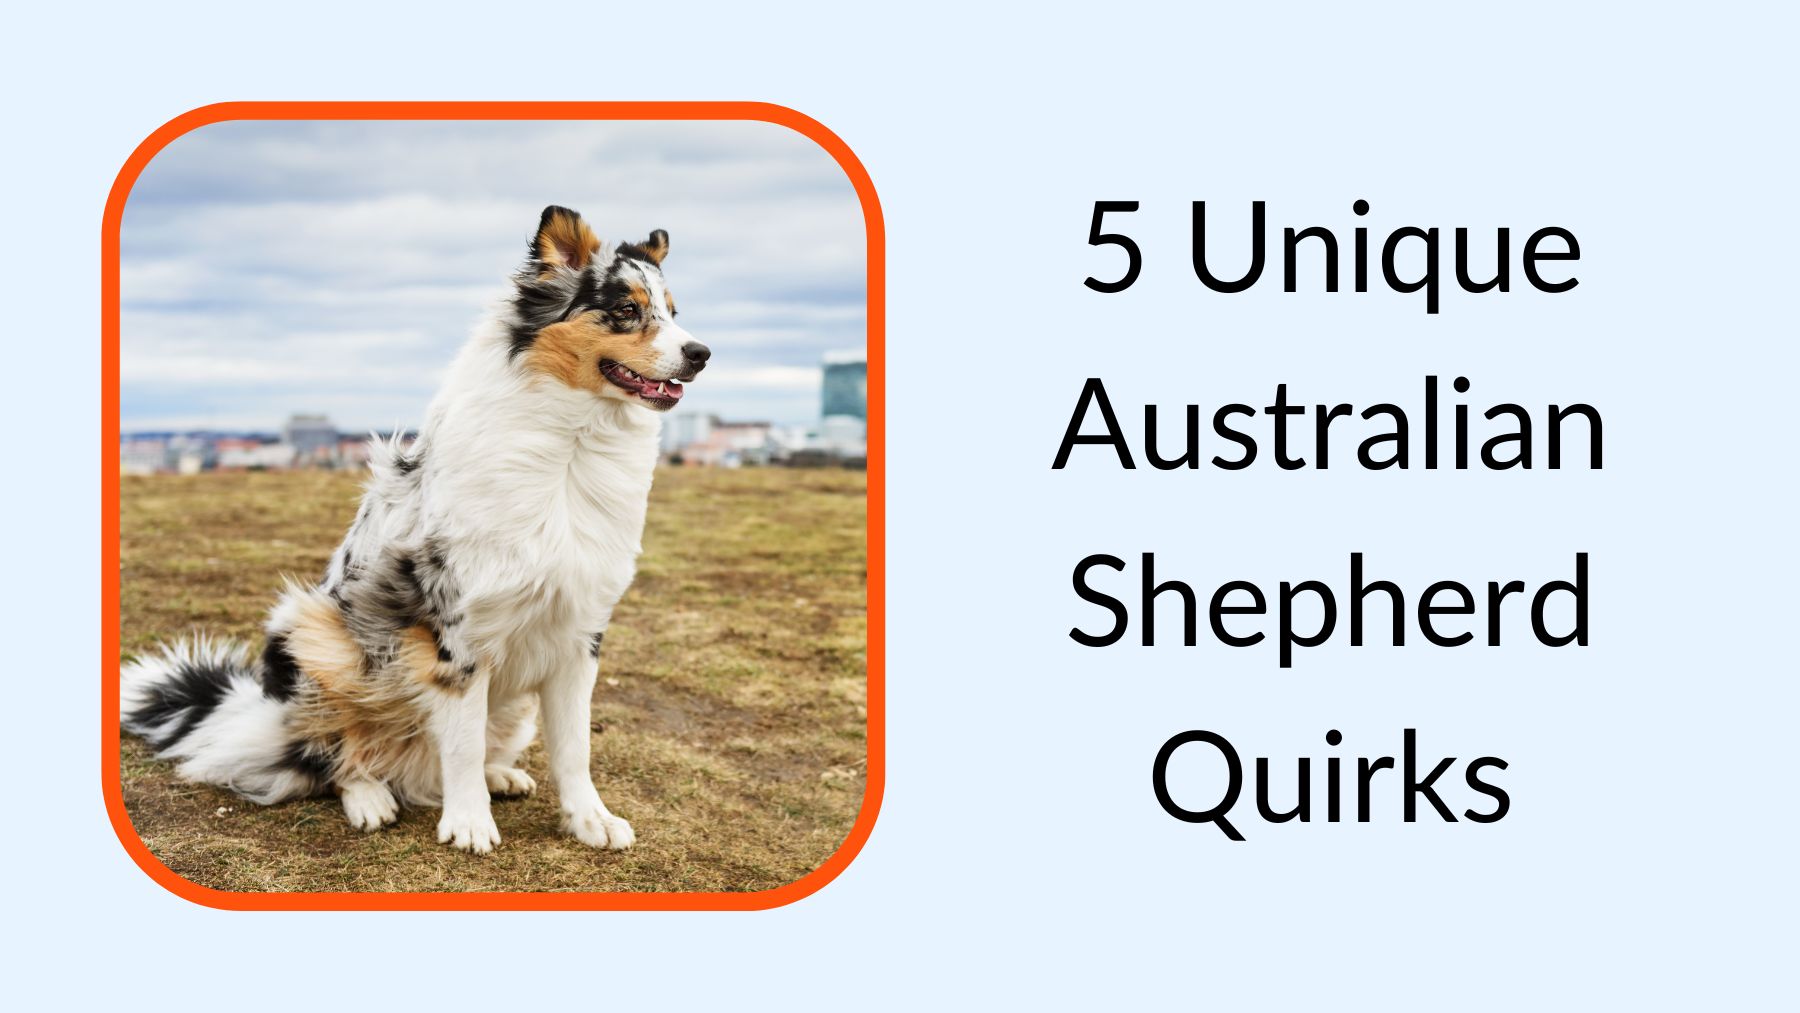 5 Unique Australian Shepherd Quirks You Need to Know